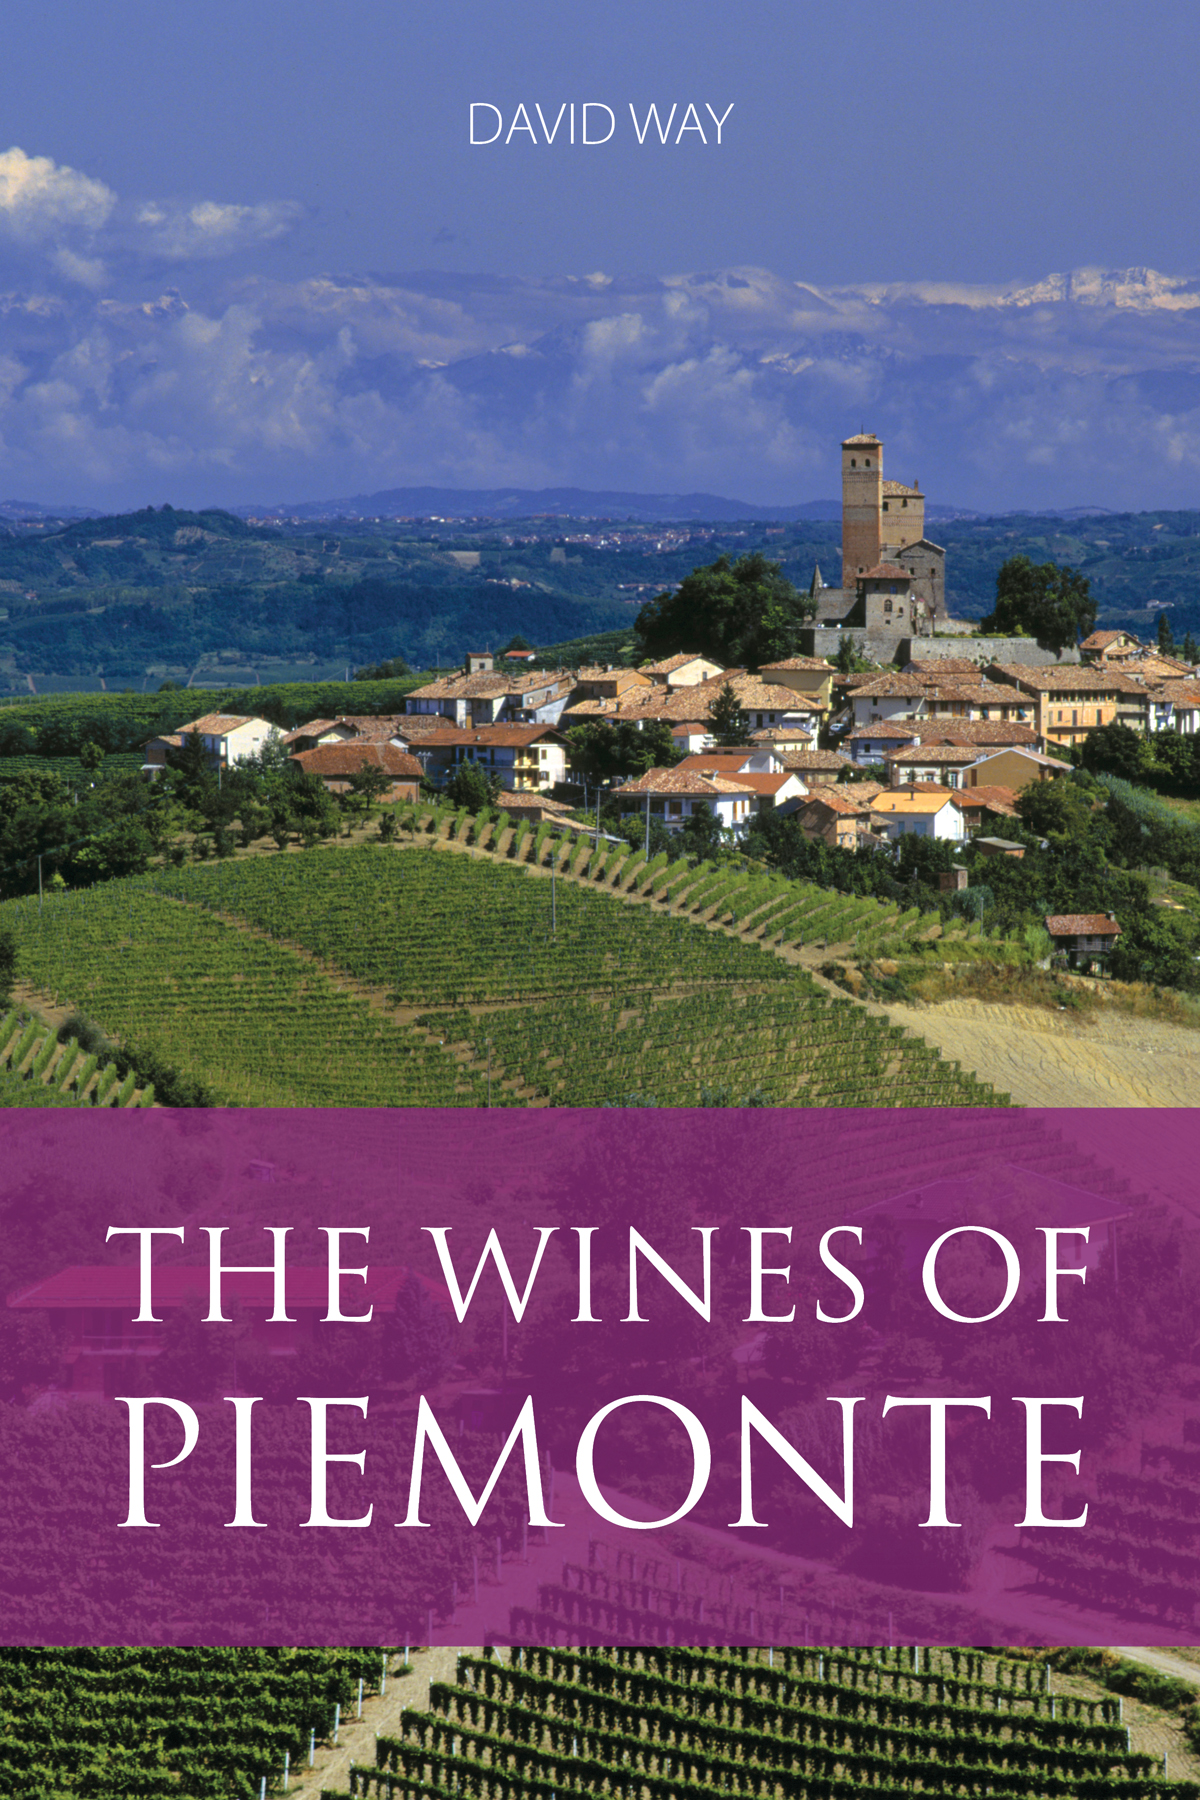 Extract: The wines of Piemonte, by David Way